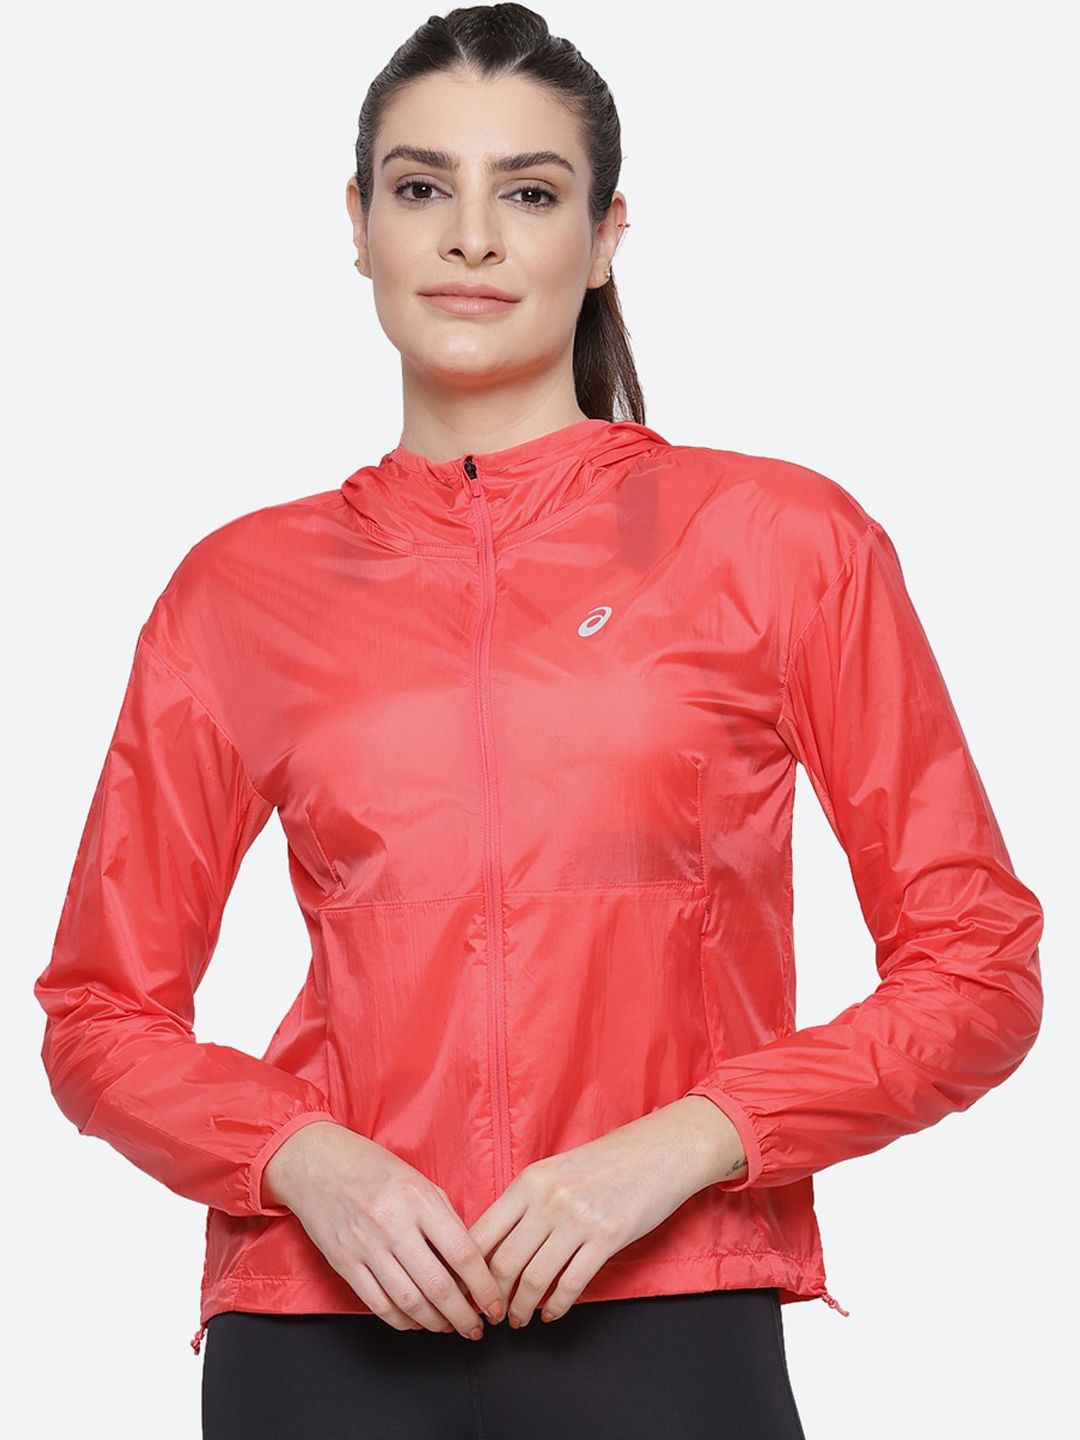 ASICS Women Pink Water Resistant Kasane Solid Running Sporty Jacket Price in India